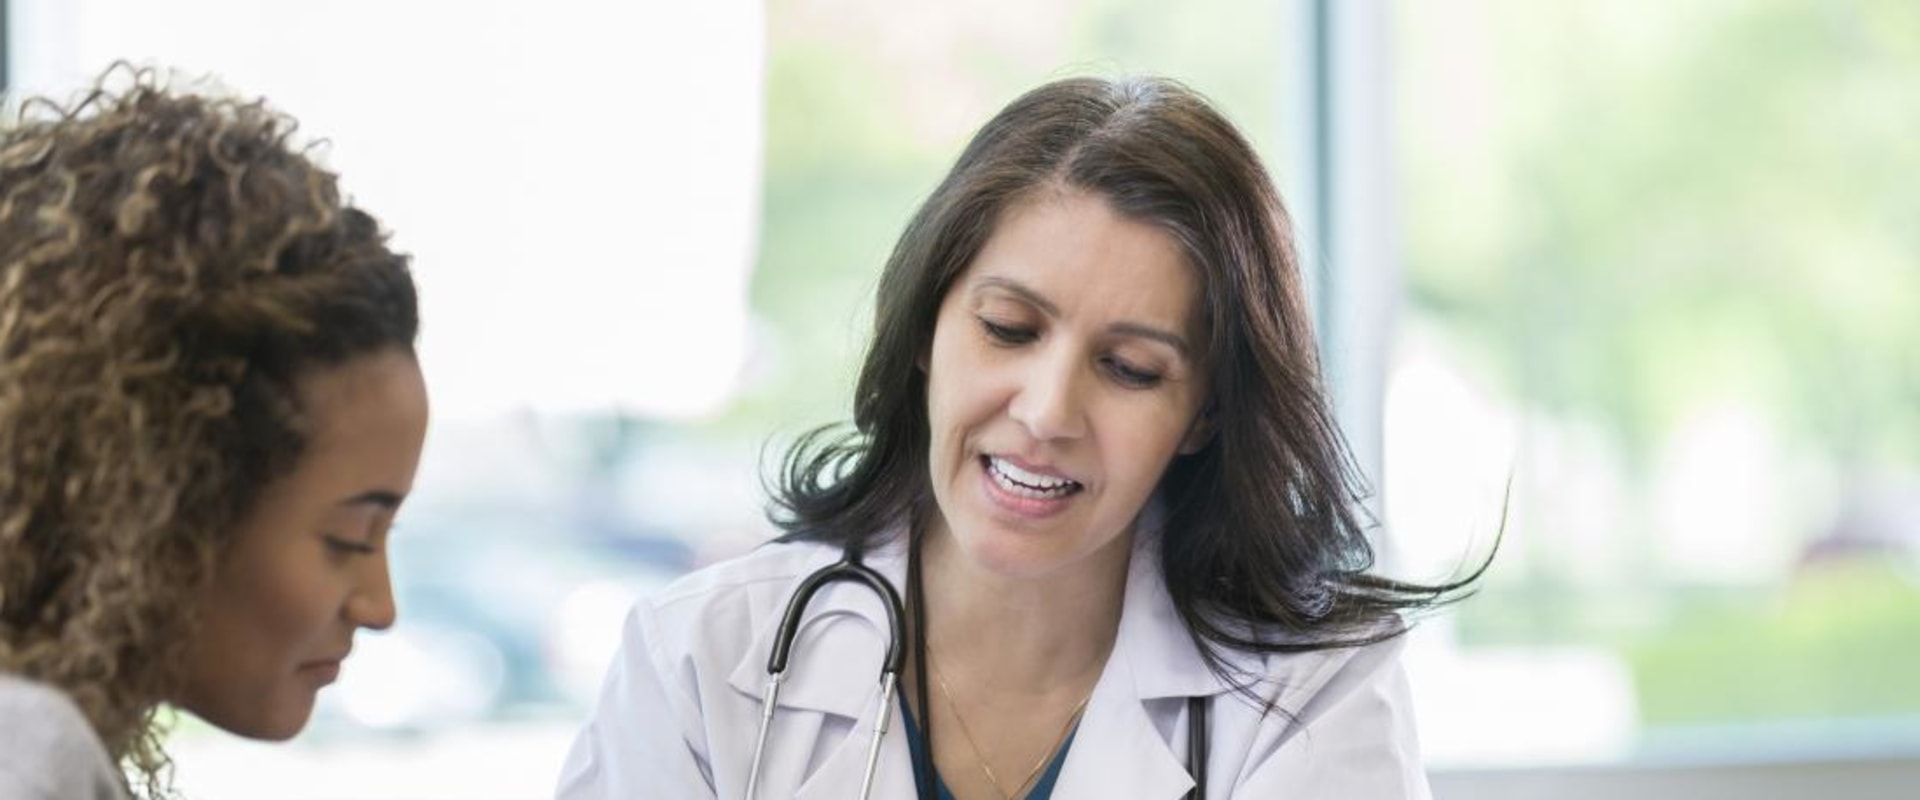 The Importance of Regular Well Woman Exams and Annual Physicals